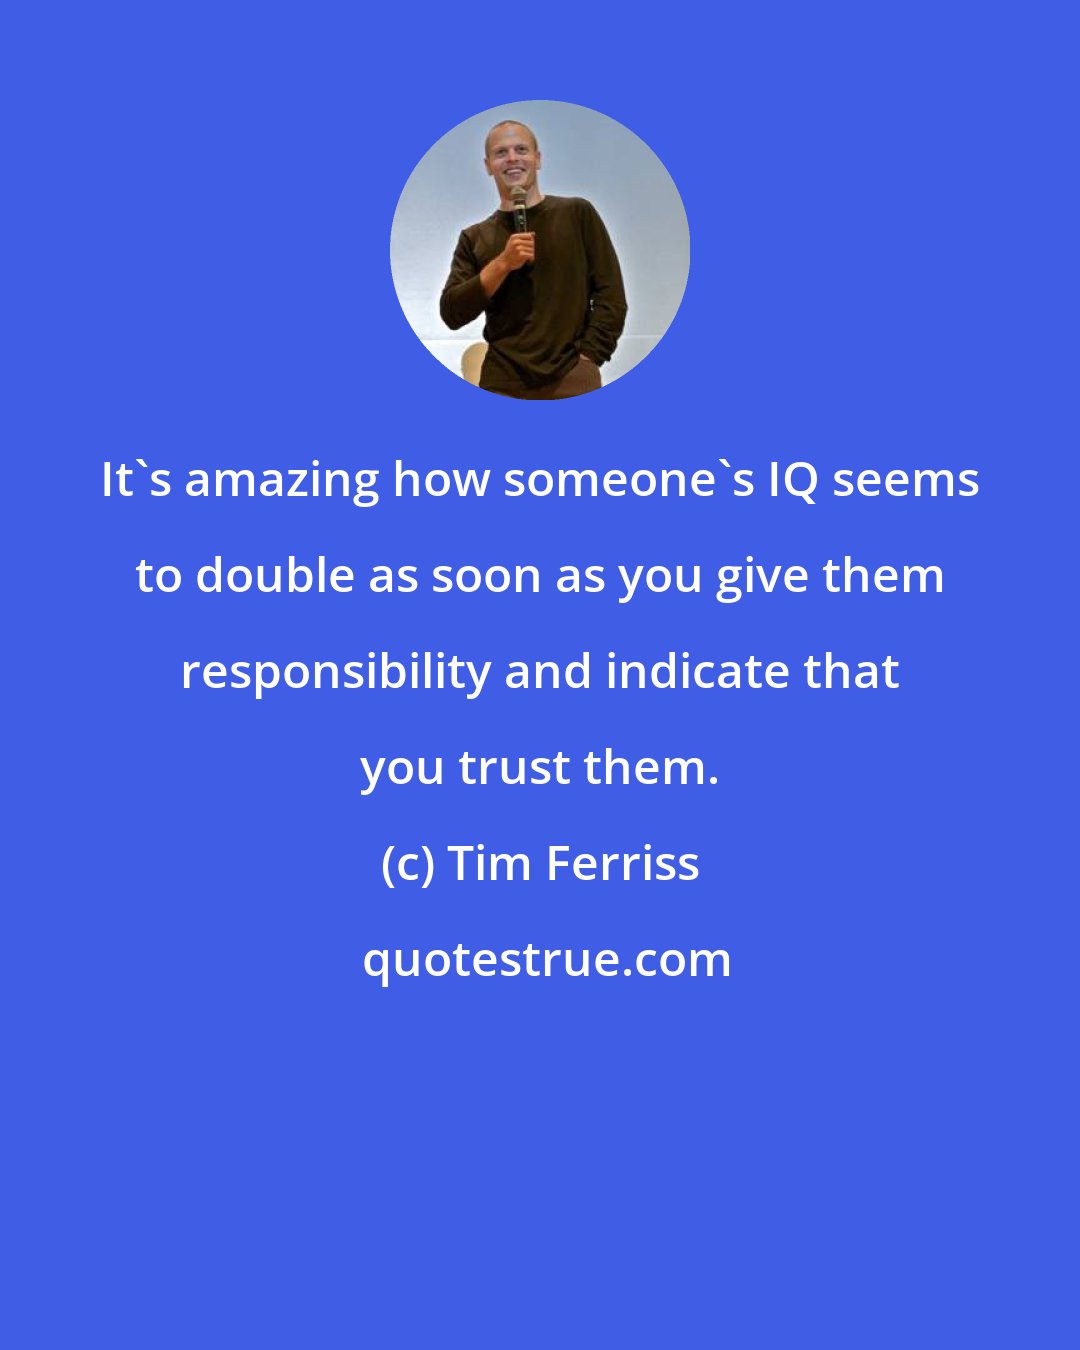 Tim Ferriss: It's amazing how someone's IQ seems to double as soon as you give them responsibility and indicate that you trust them.